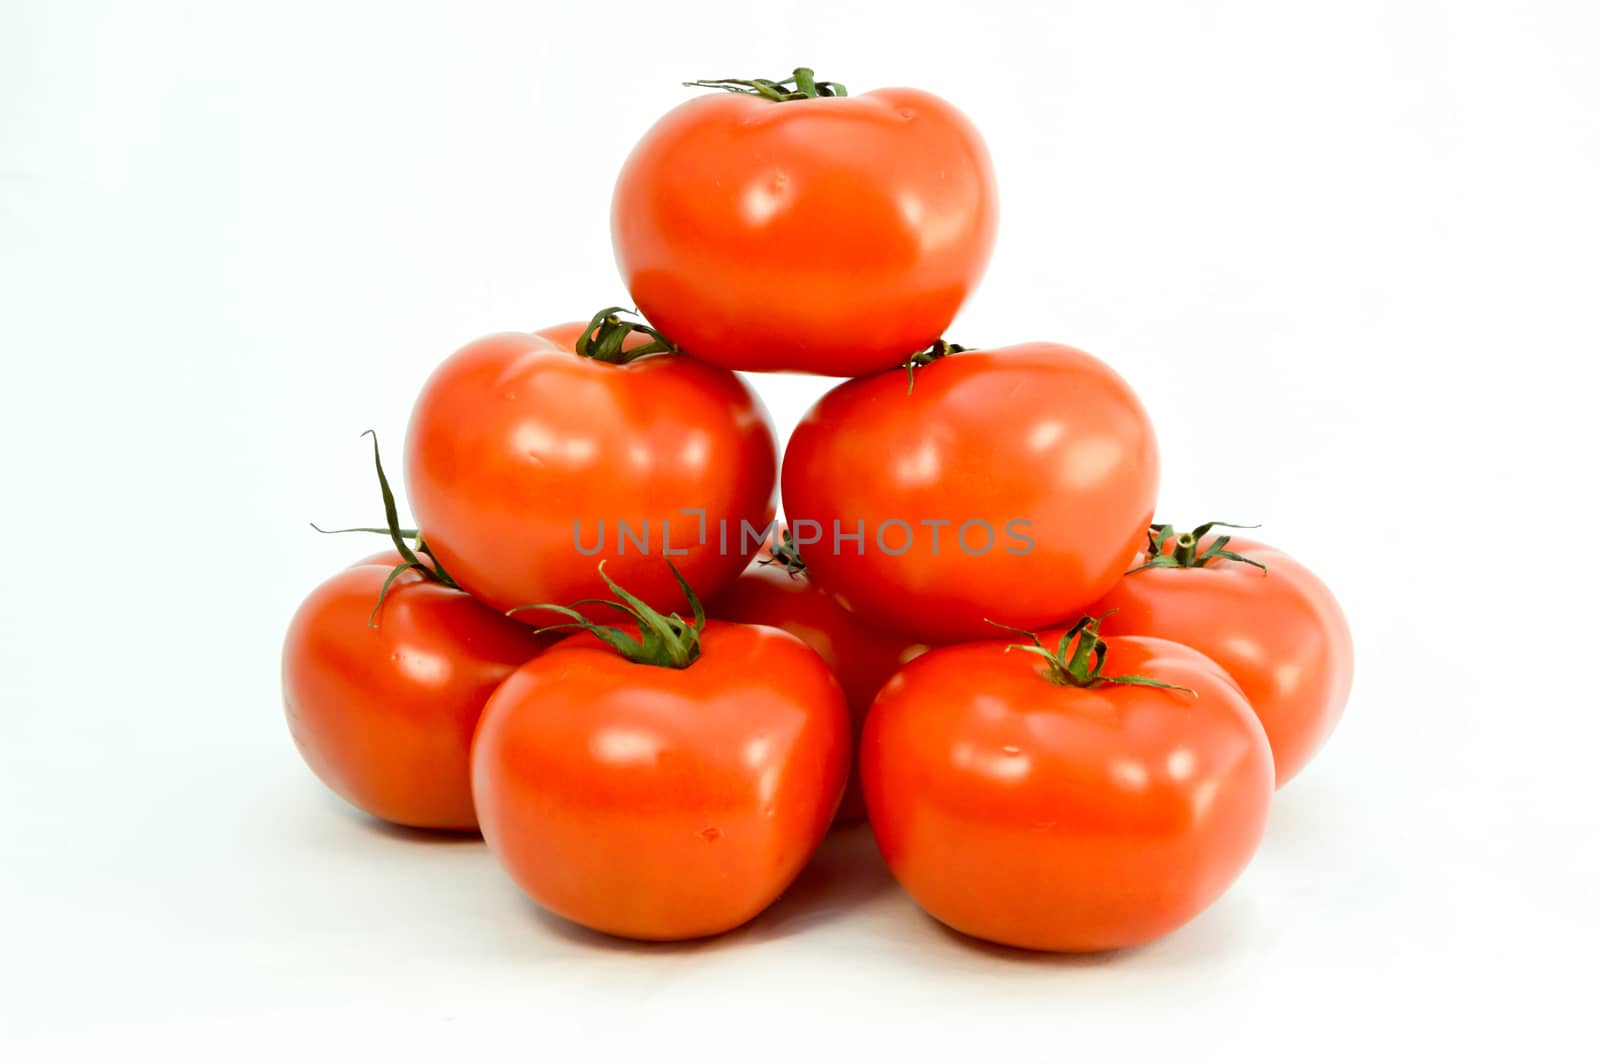 Tomato pyramid well red on white background